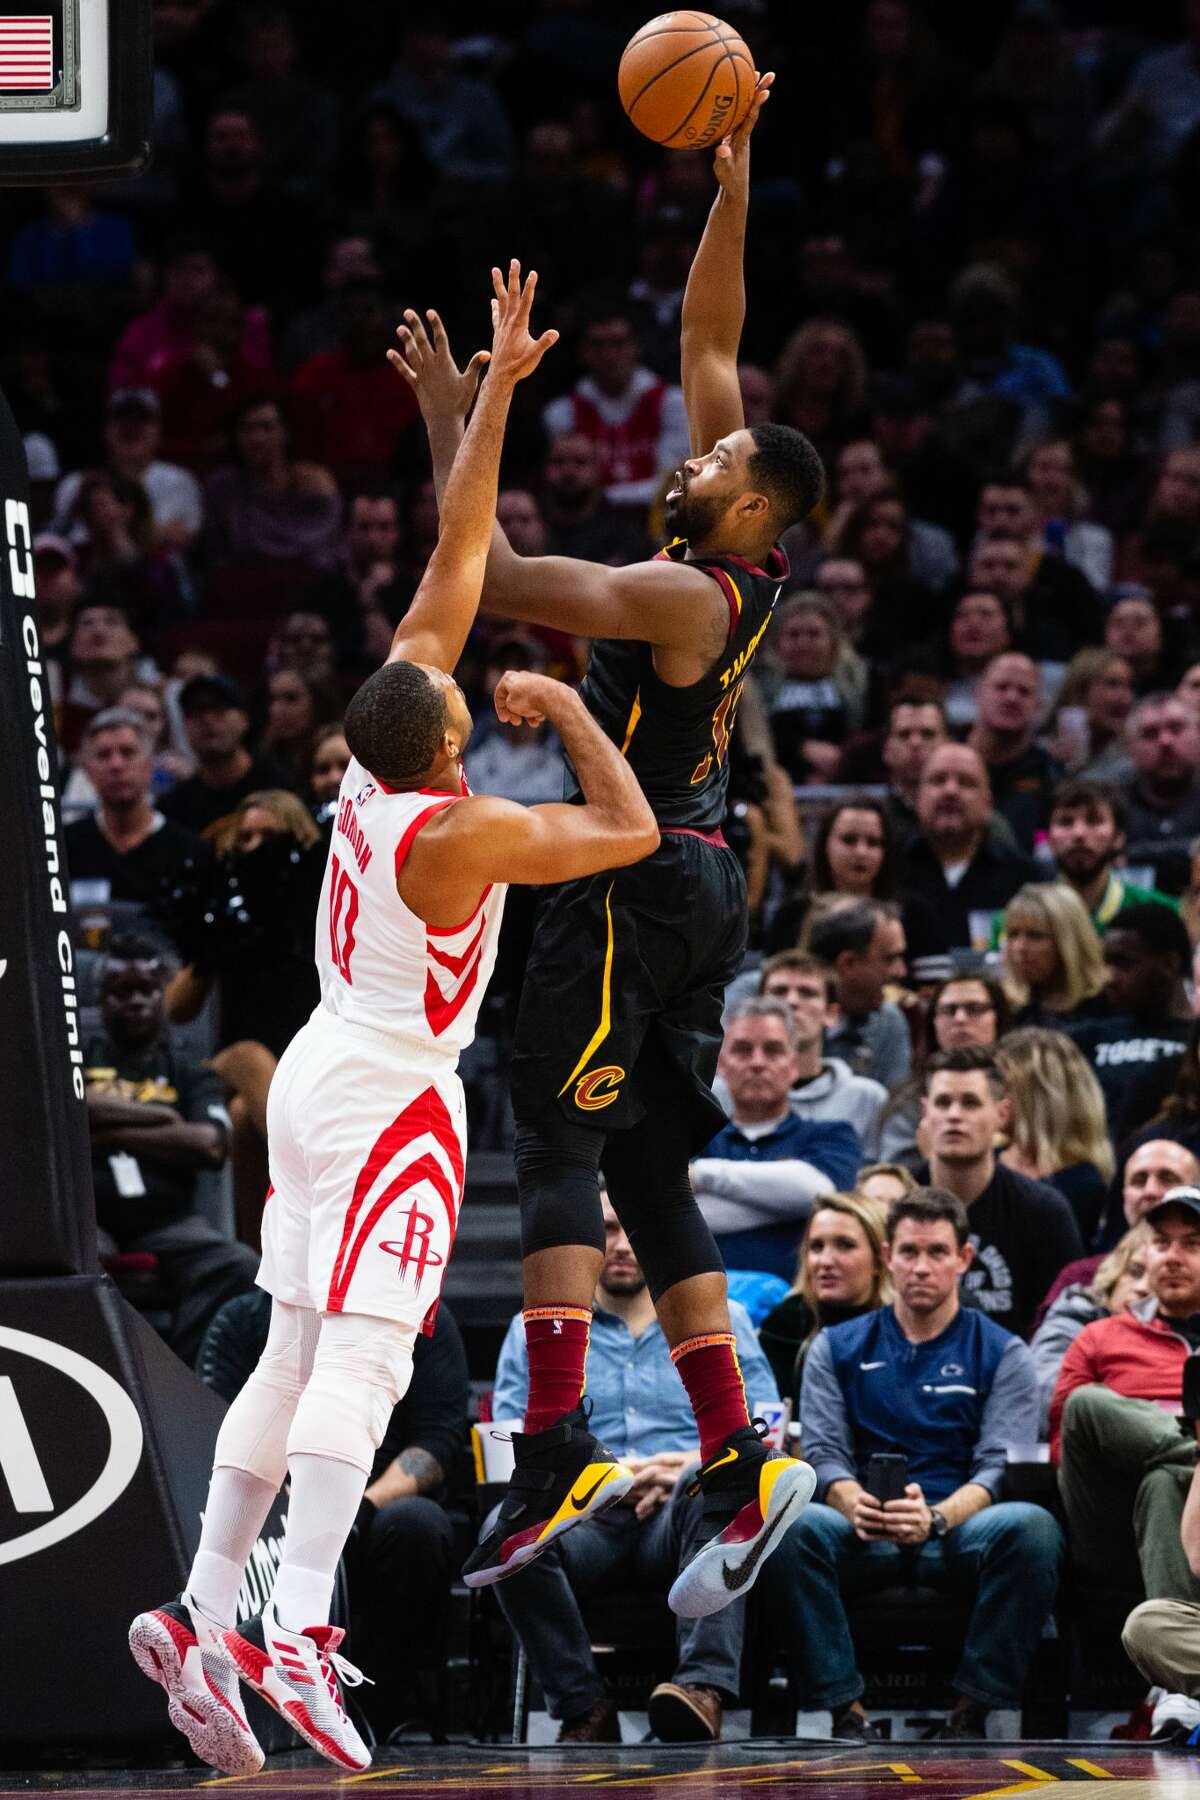 CLEVELAND, OH - NOVEMBER 24: Tristan Thompson #13 of the Cleveland Cavaliers shoots over Eric Gordon #10 of the Houston Rockets during the first half at Quicken Loans Arena on November 24, 2018 in Cleveland, Ohio. NOTE TO USER: User expressly acknowledges and agrees that, by downloading and/or using this photograph, user is consenting to the terms and conditions of the Getty Images License Agreement. (Photo by Jason Miller/Getty Images)